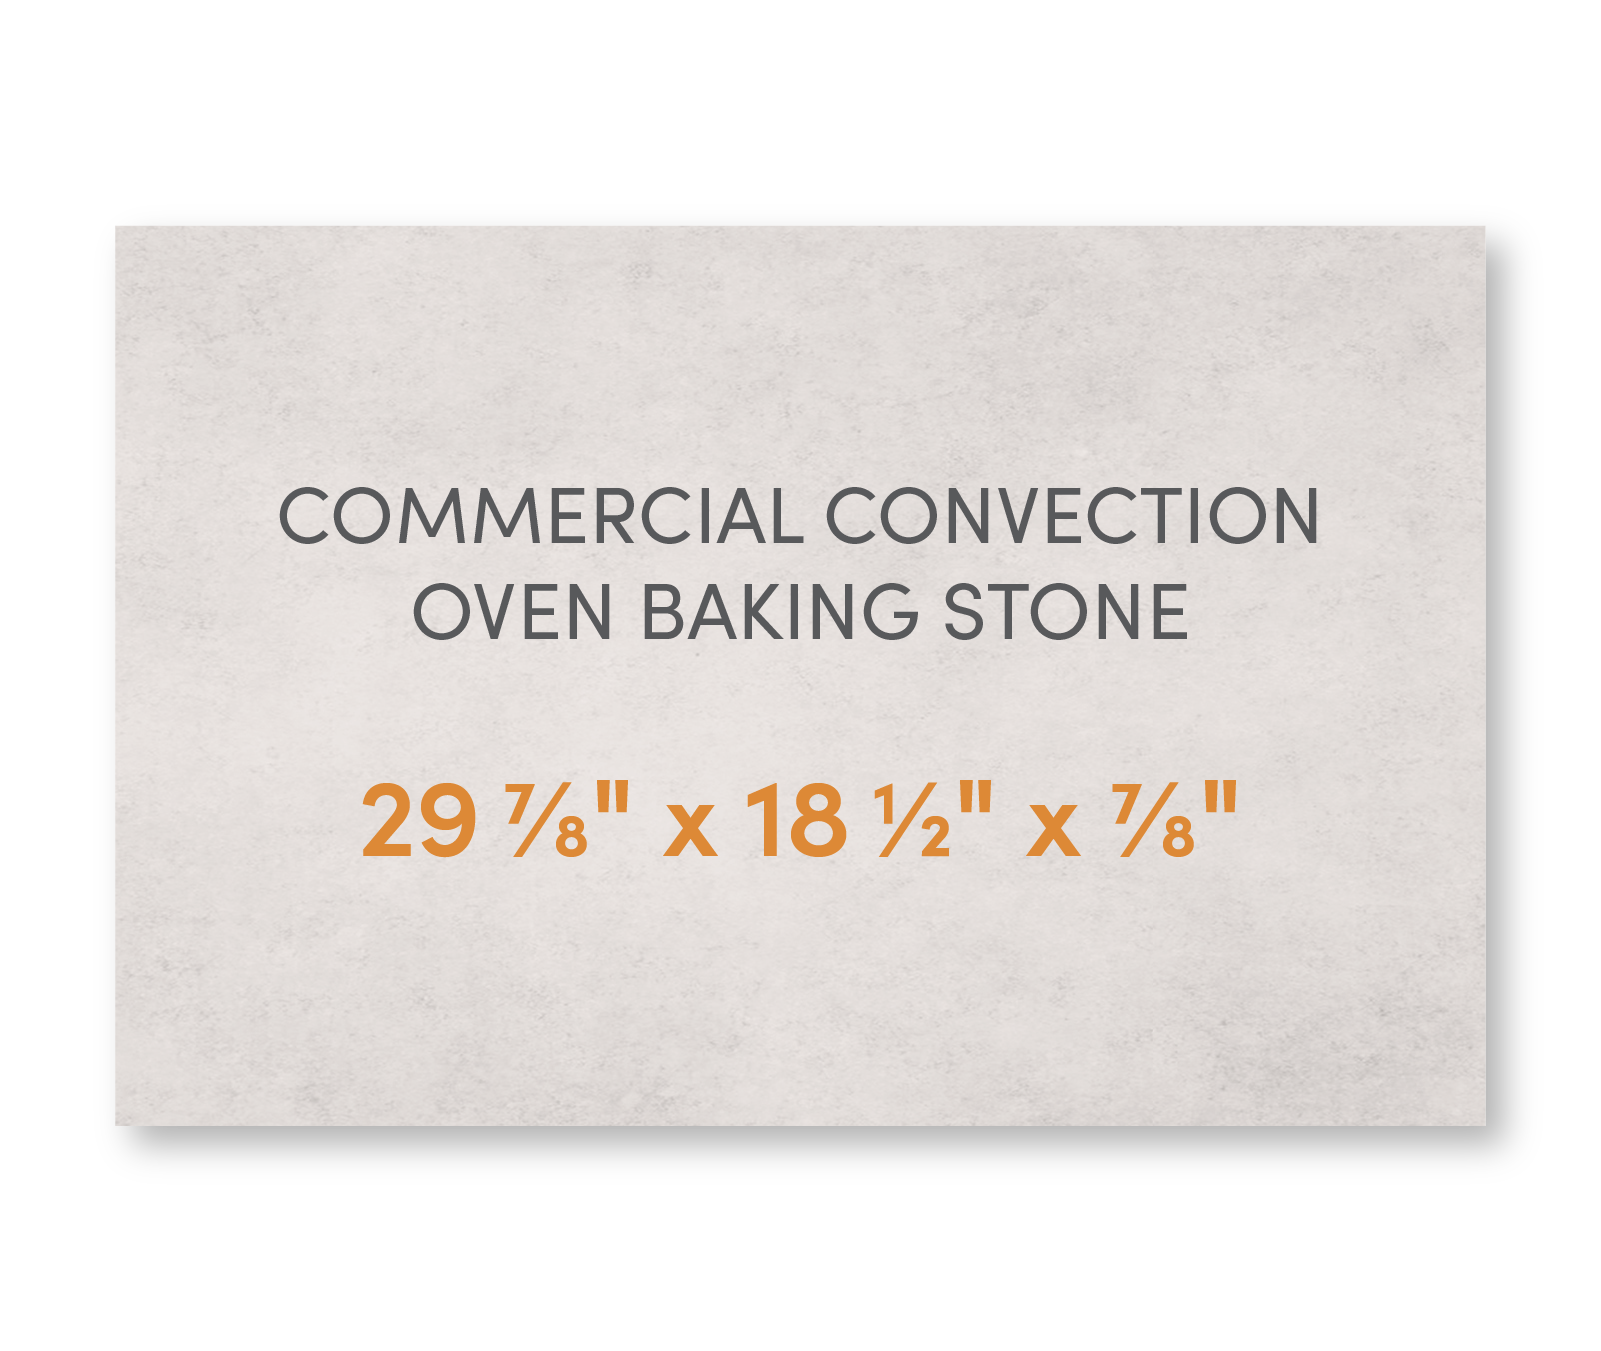 Commercial Convection Oven Baking Stone 29 7/8" x 18 1/2"